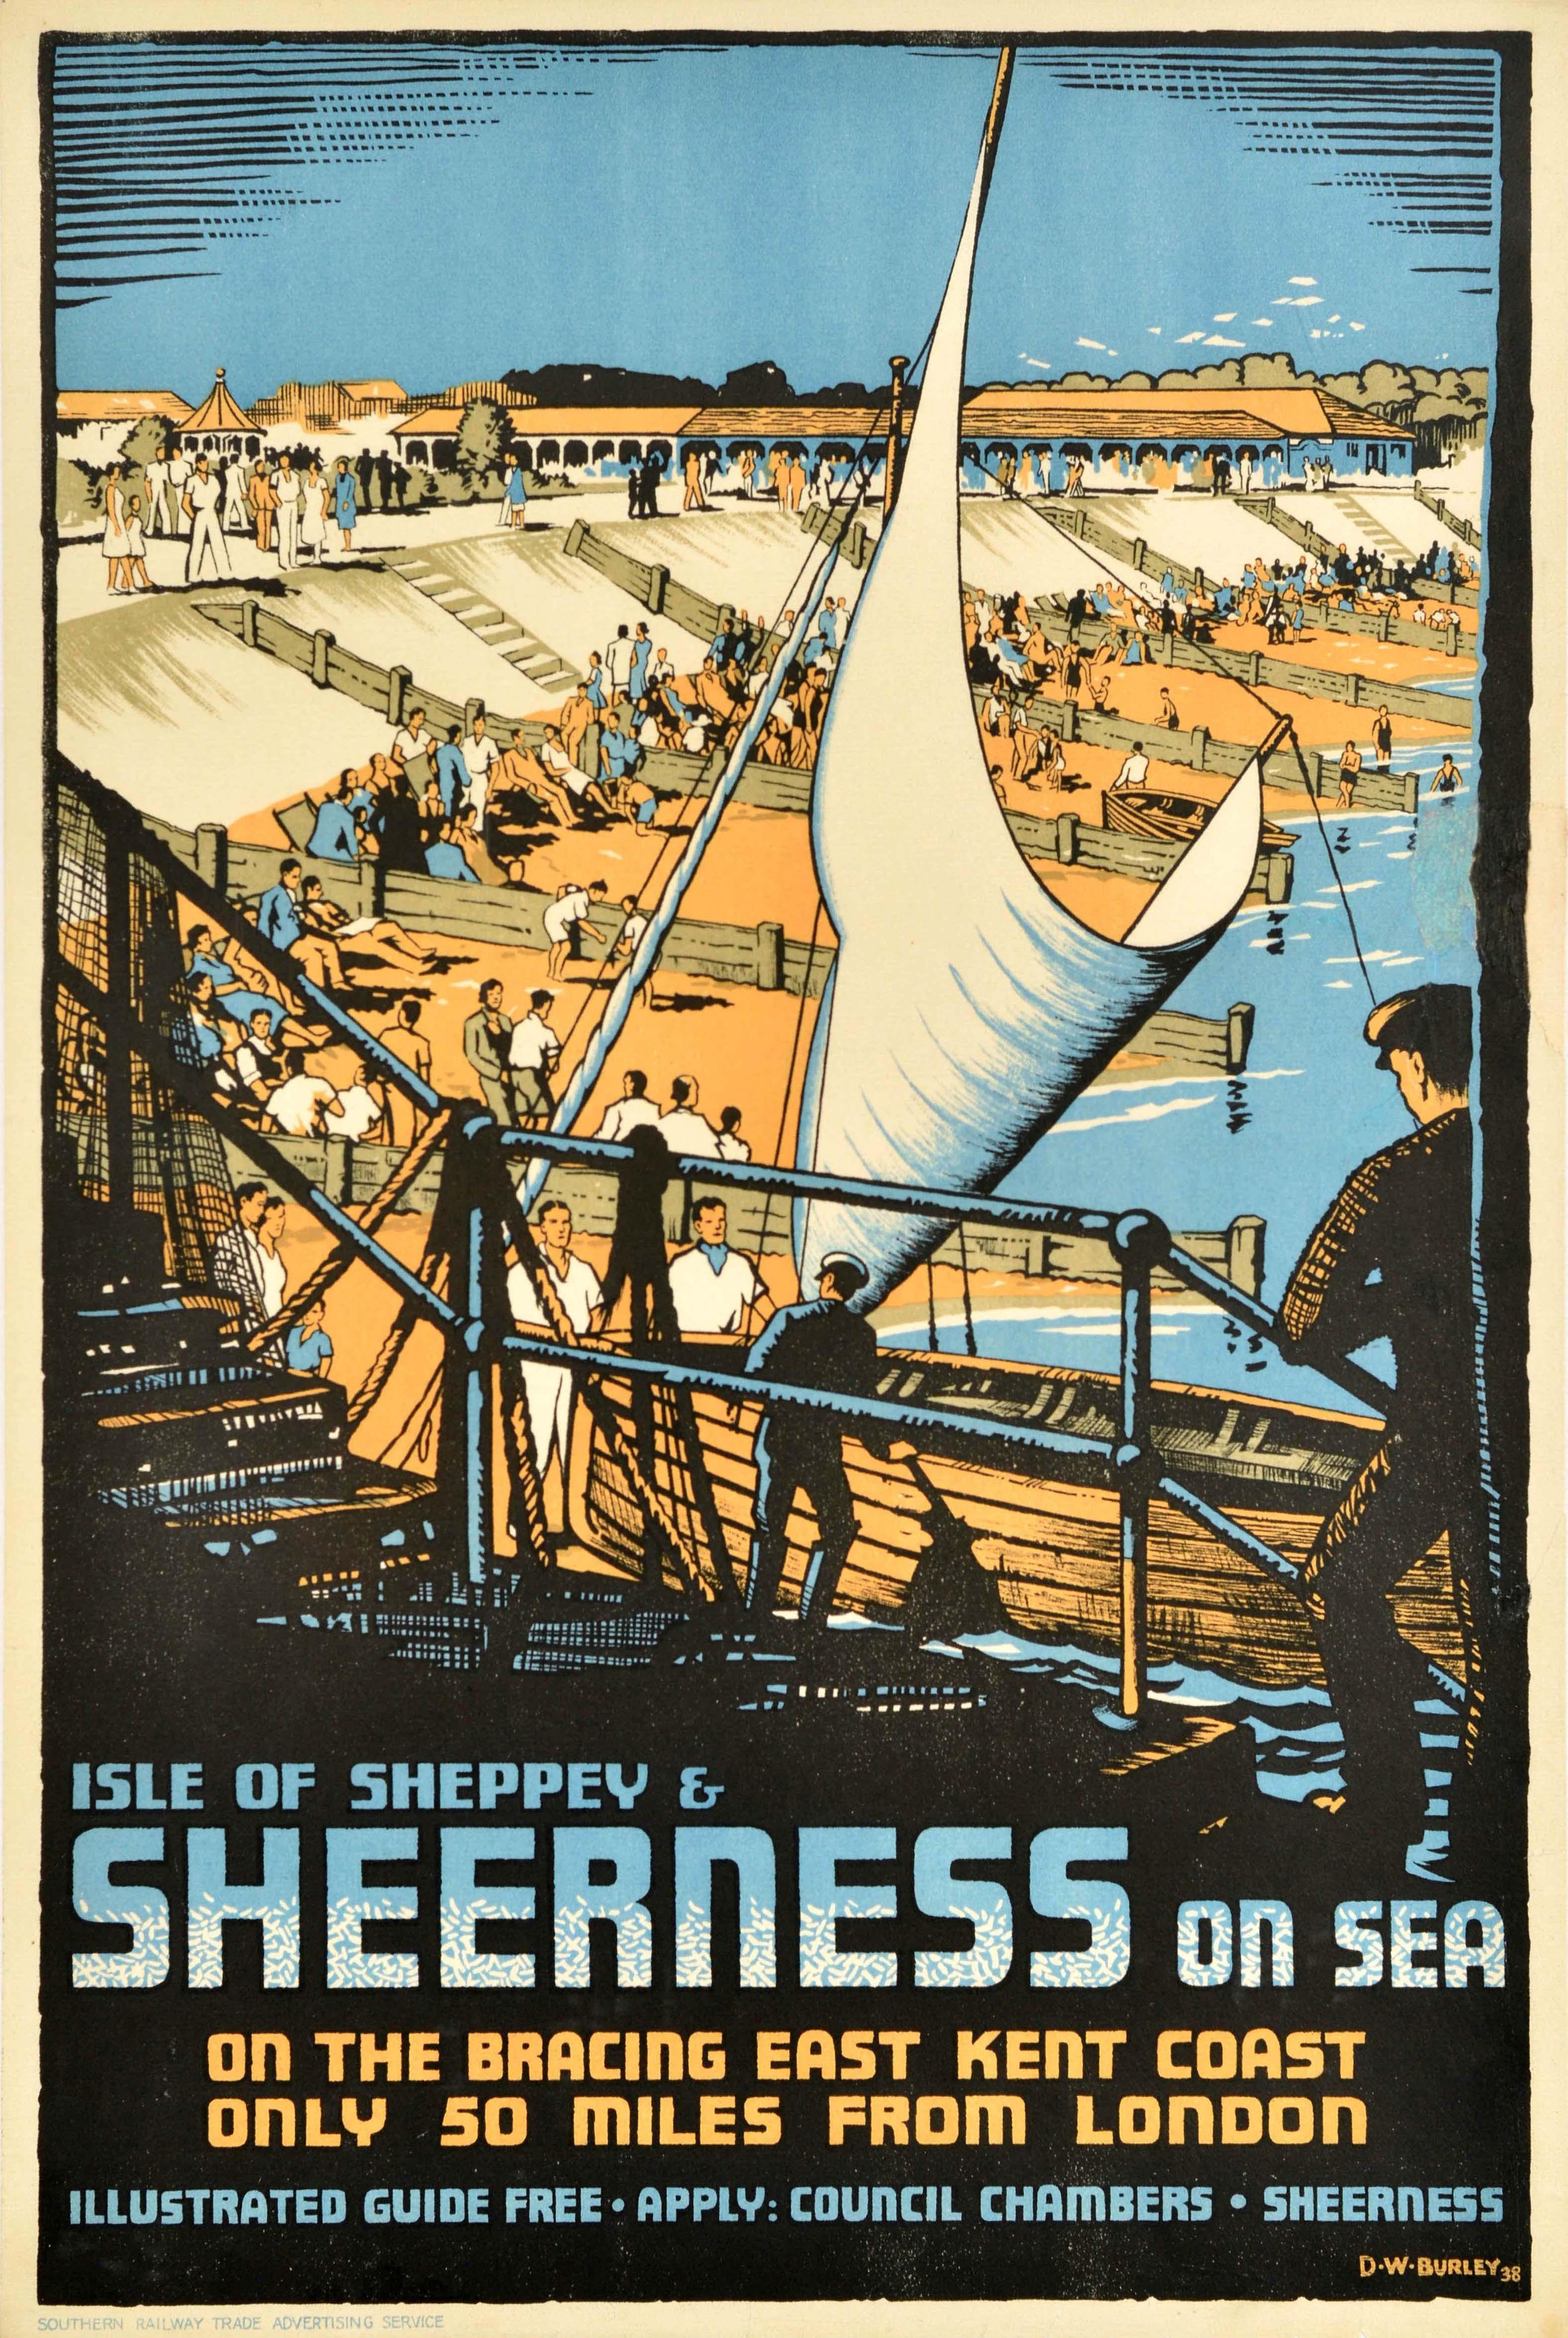 Unknown Print - Original Vintage Travel Poster Sheerness On Sea Isle Of Sheppey Kent Railway